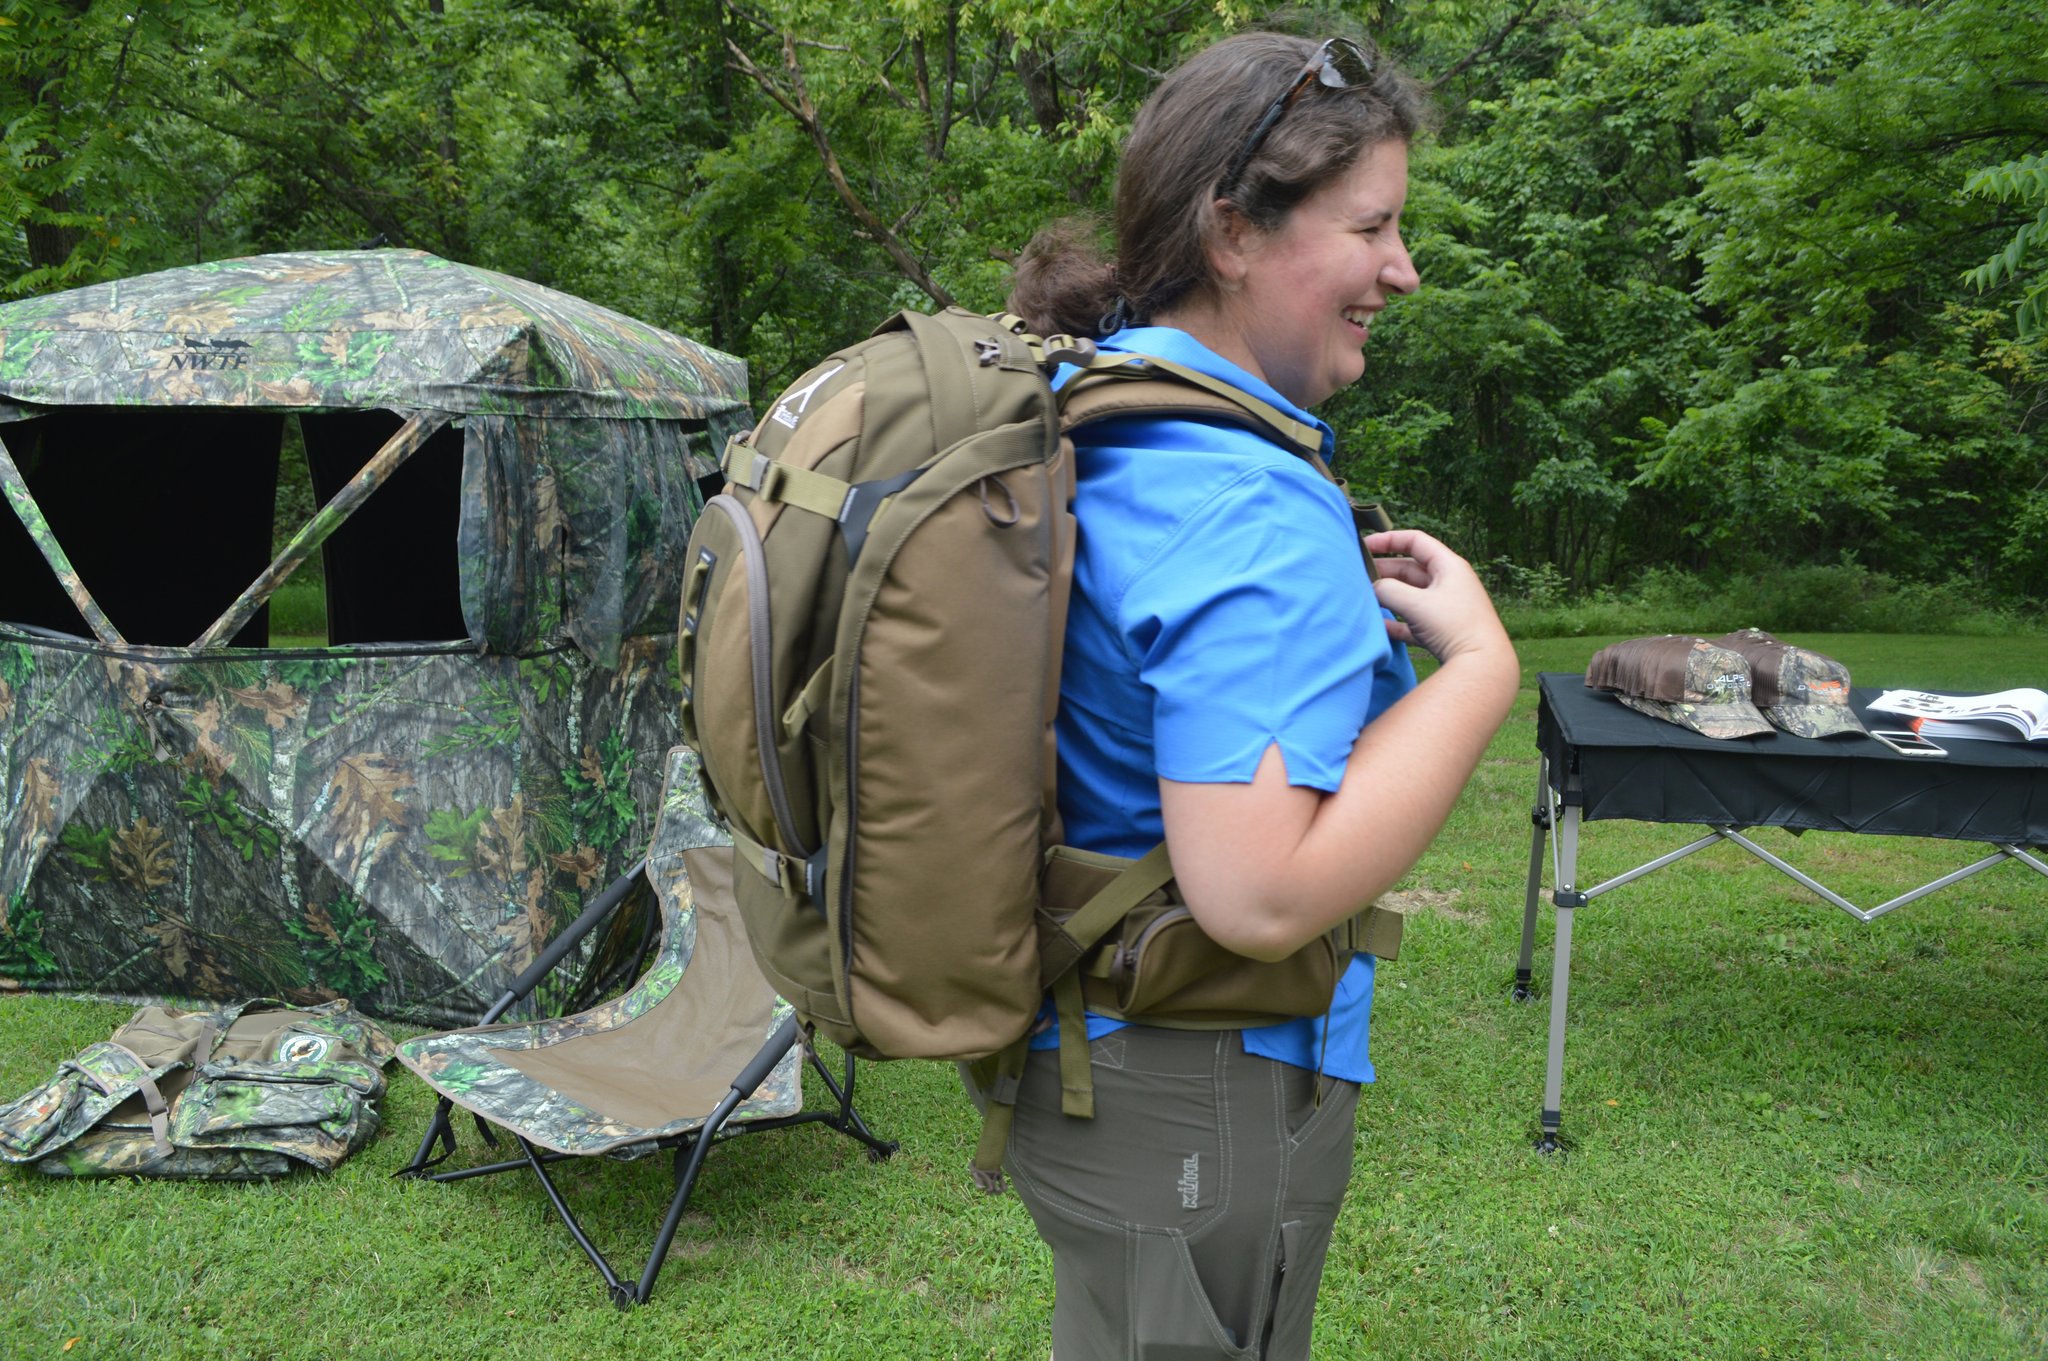 The new Monarch X women's meat pack is the first of its kind we've seen on the market. The fit and comfort is spot on, and we can't wait to get this one out in the field this Fall. (Photo: Kristin Alberts)